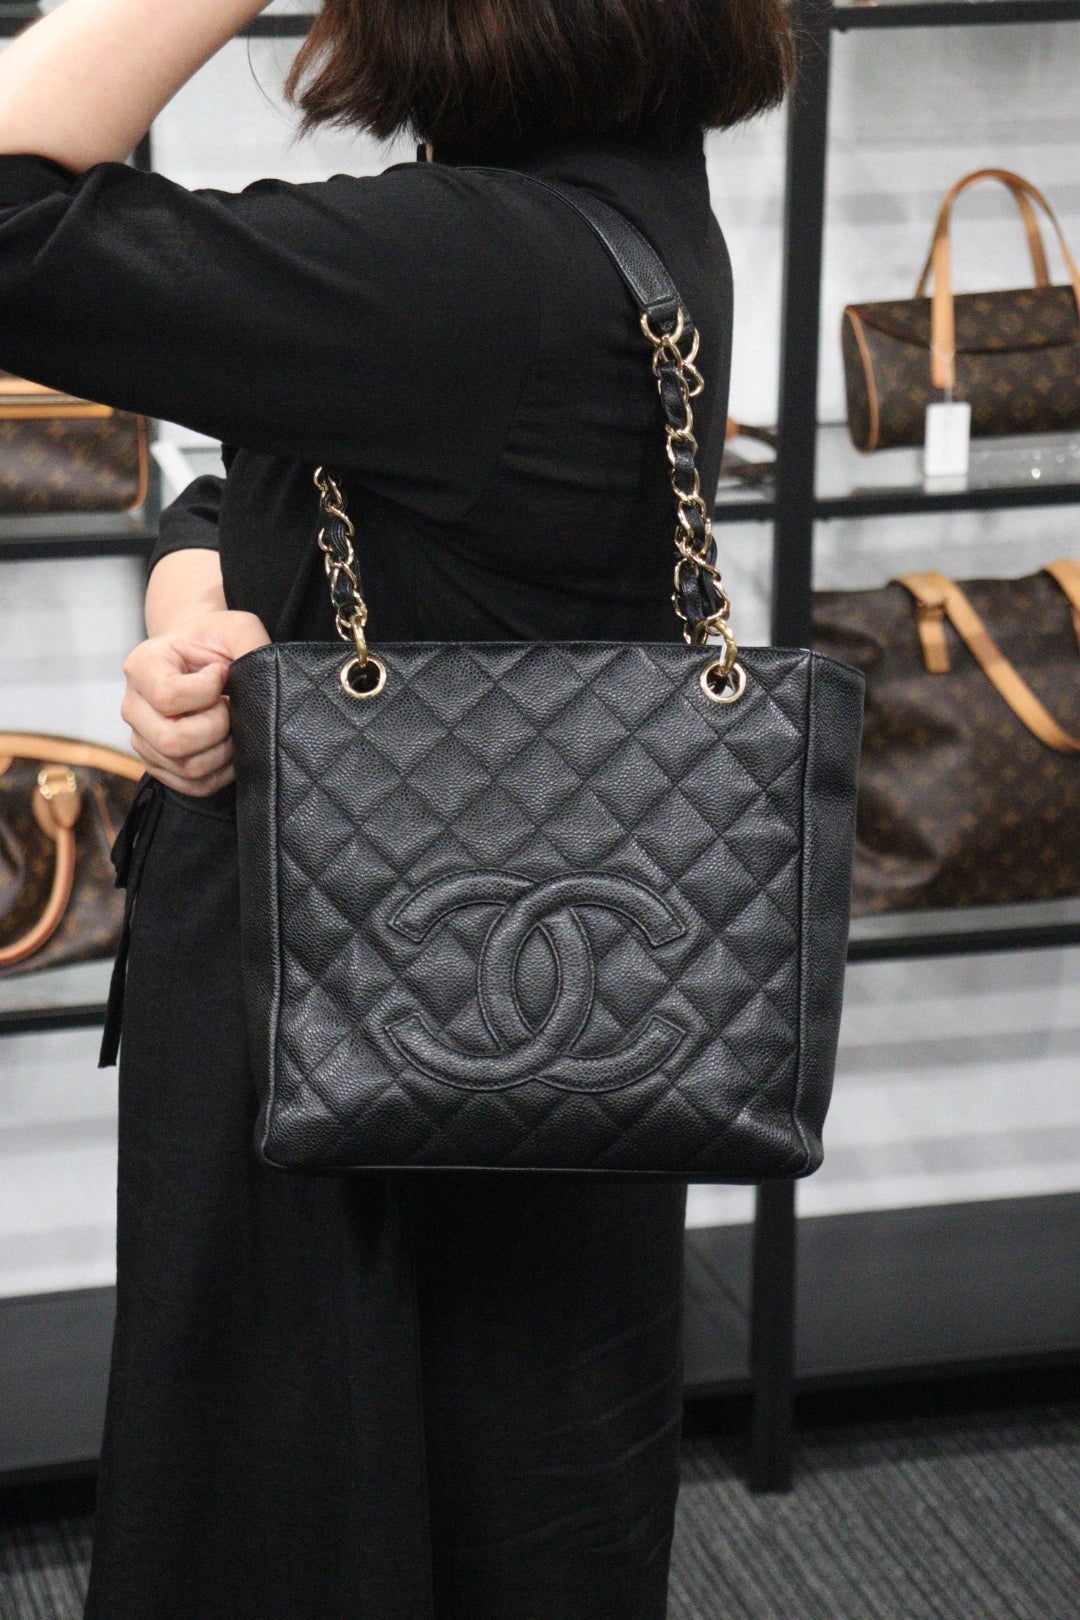 Chanel Pre-owned 2011 Petite Shopping Tote Bag - Black